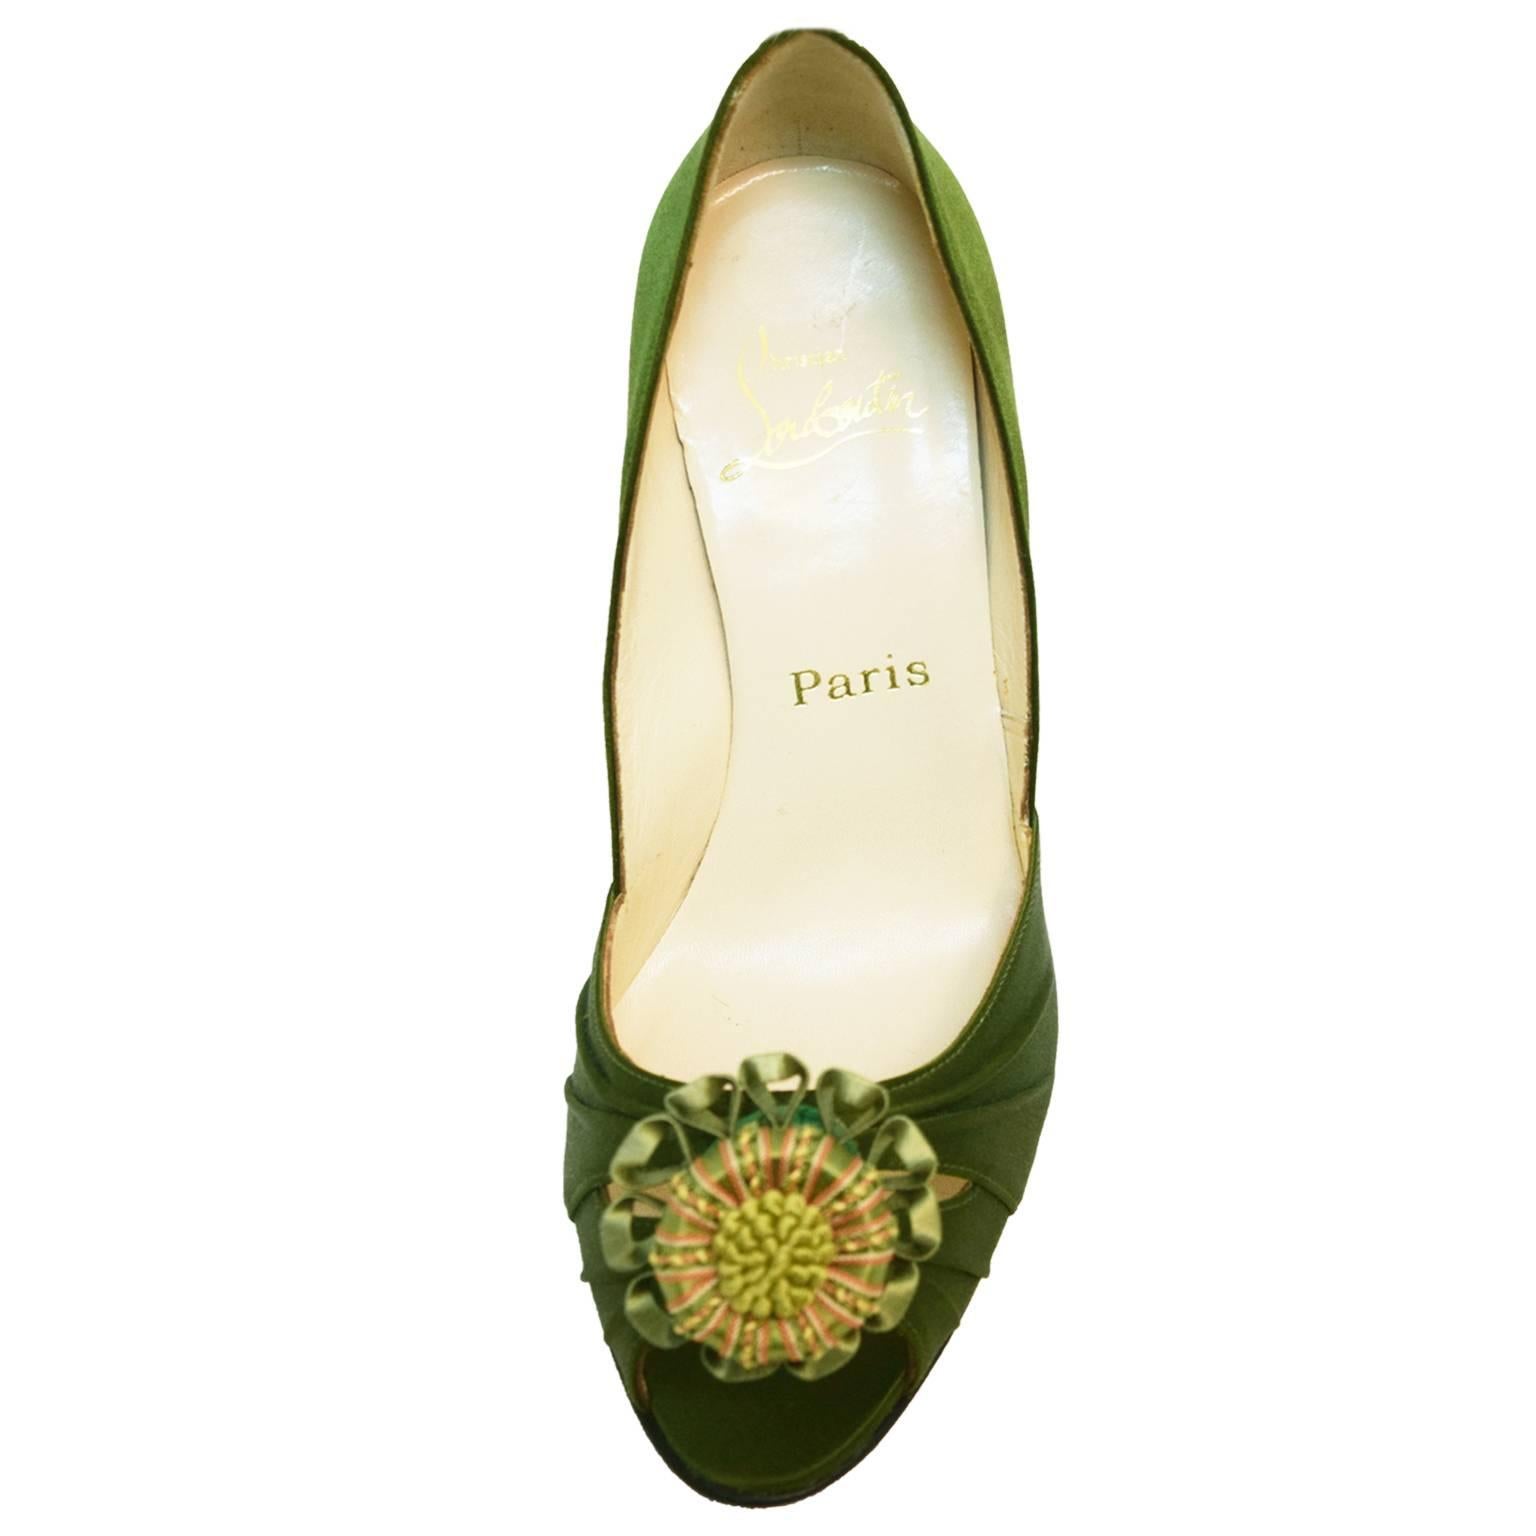 These exotic Christian Louboutin Peep-toes are covered in full olive silky satin, with gathering detailing on the toe box. Hand stitched Florette embellishment is elegantly placed on the toe box for an overall beautiful look. Red bottom Sole, and